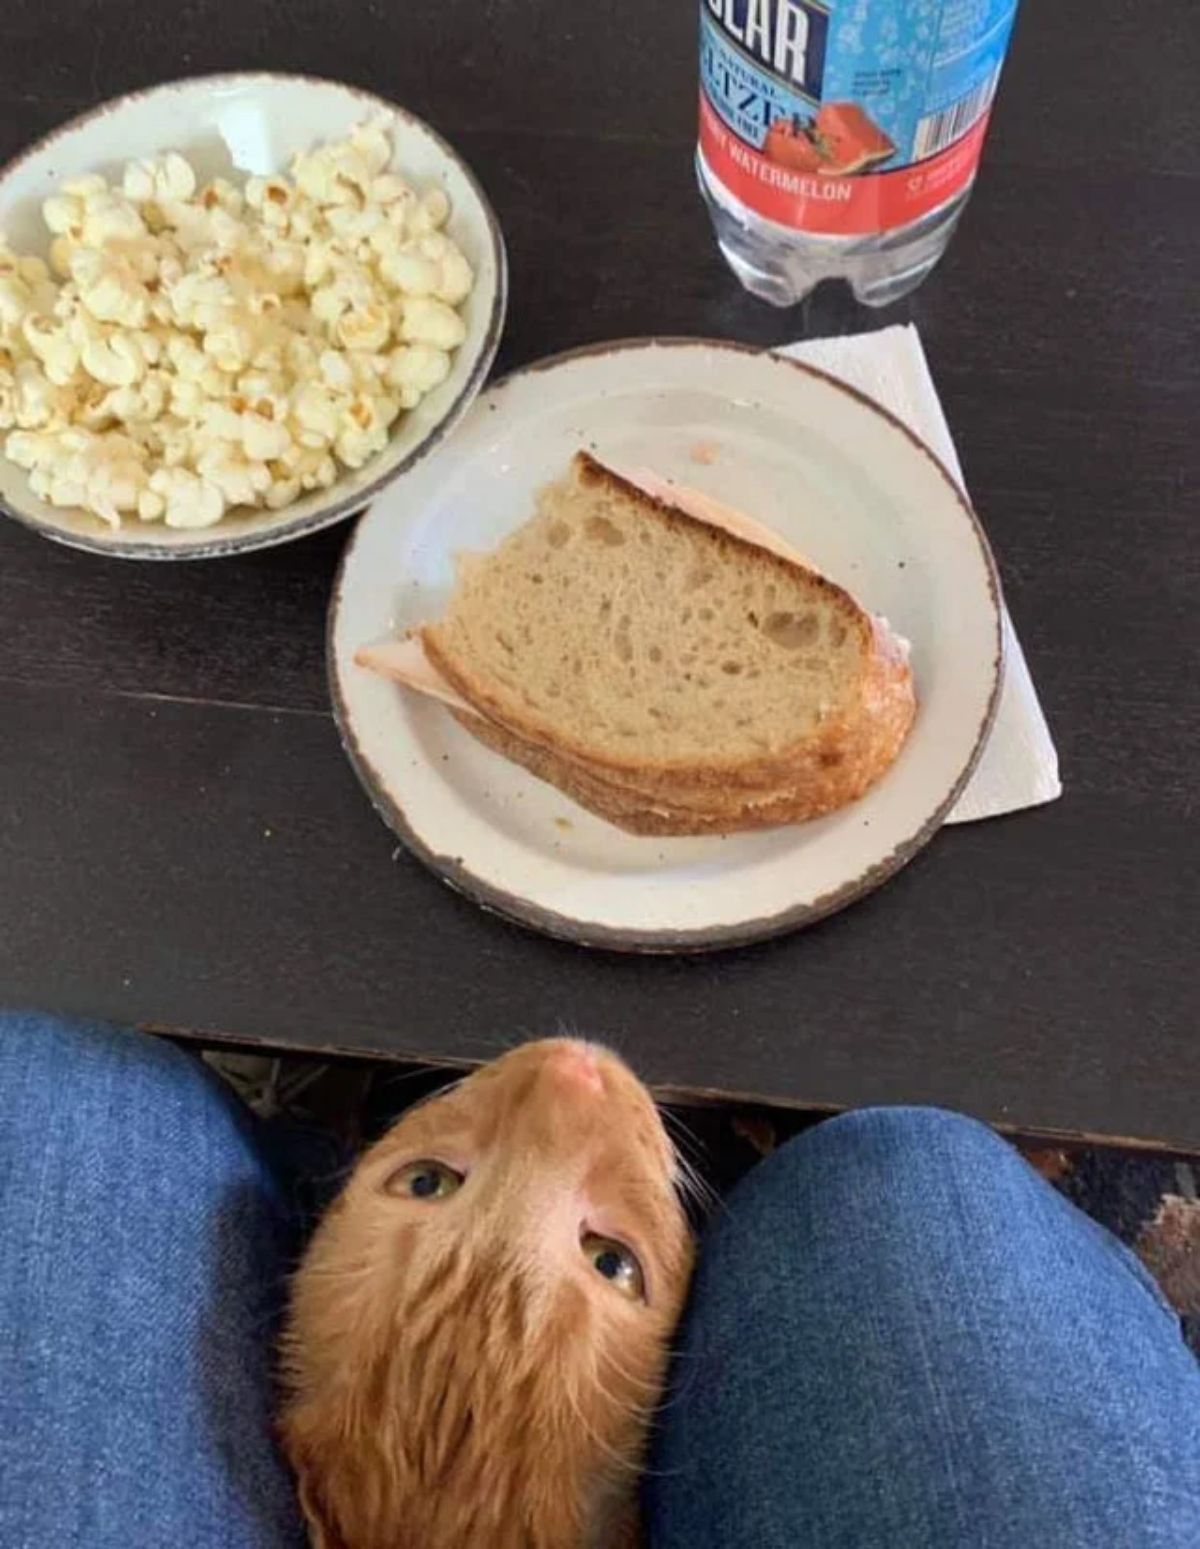 orange cat sticking head between someone's knees to look at a sandwich